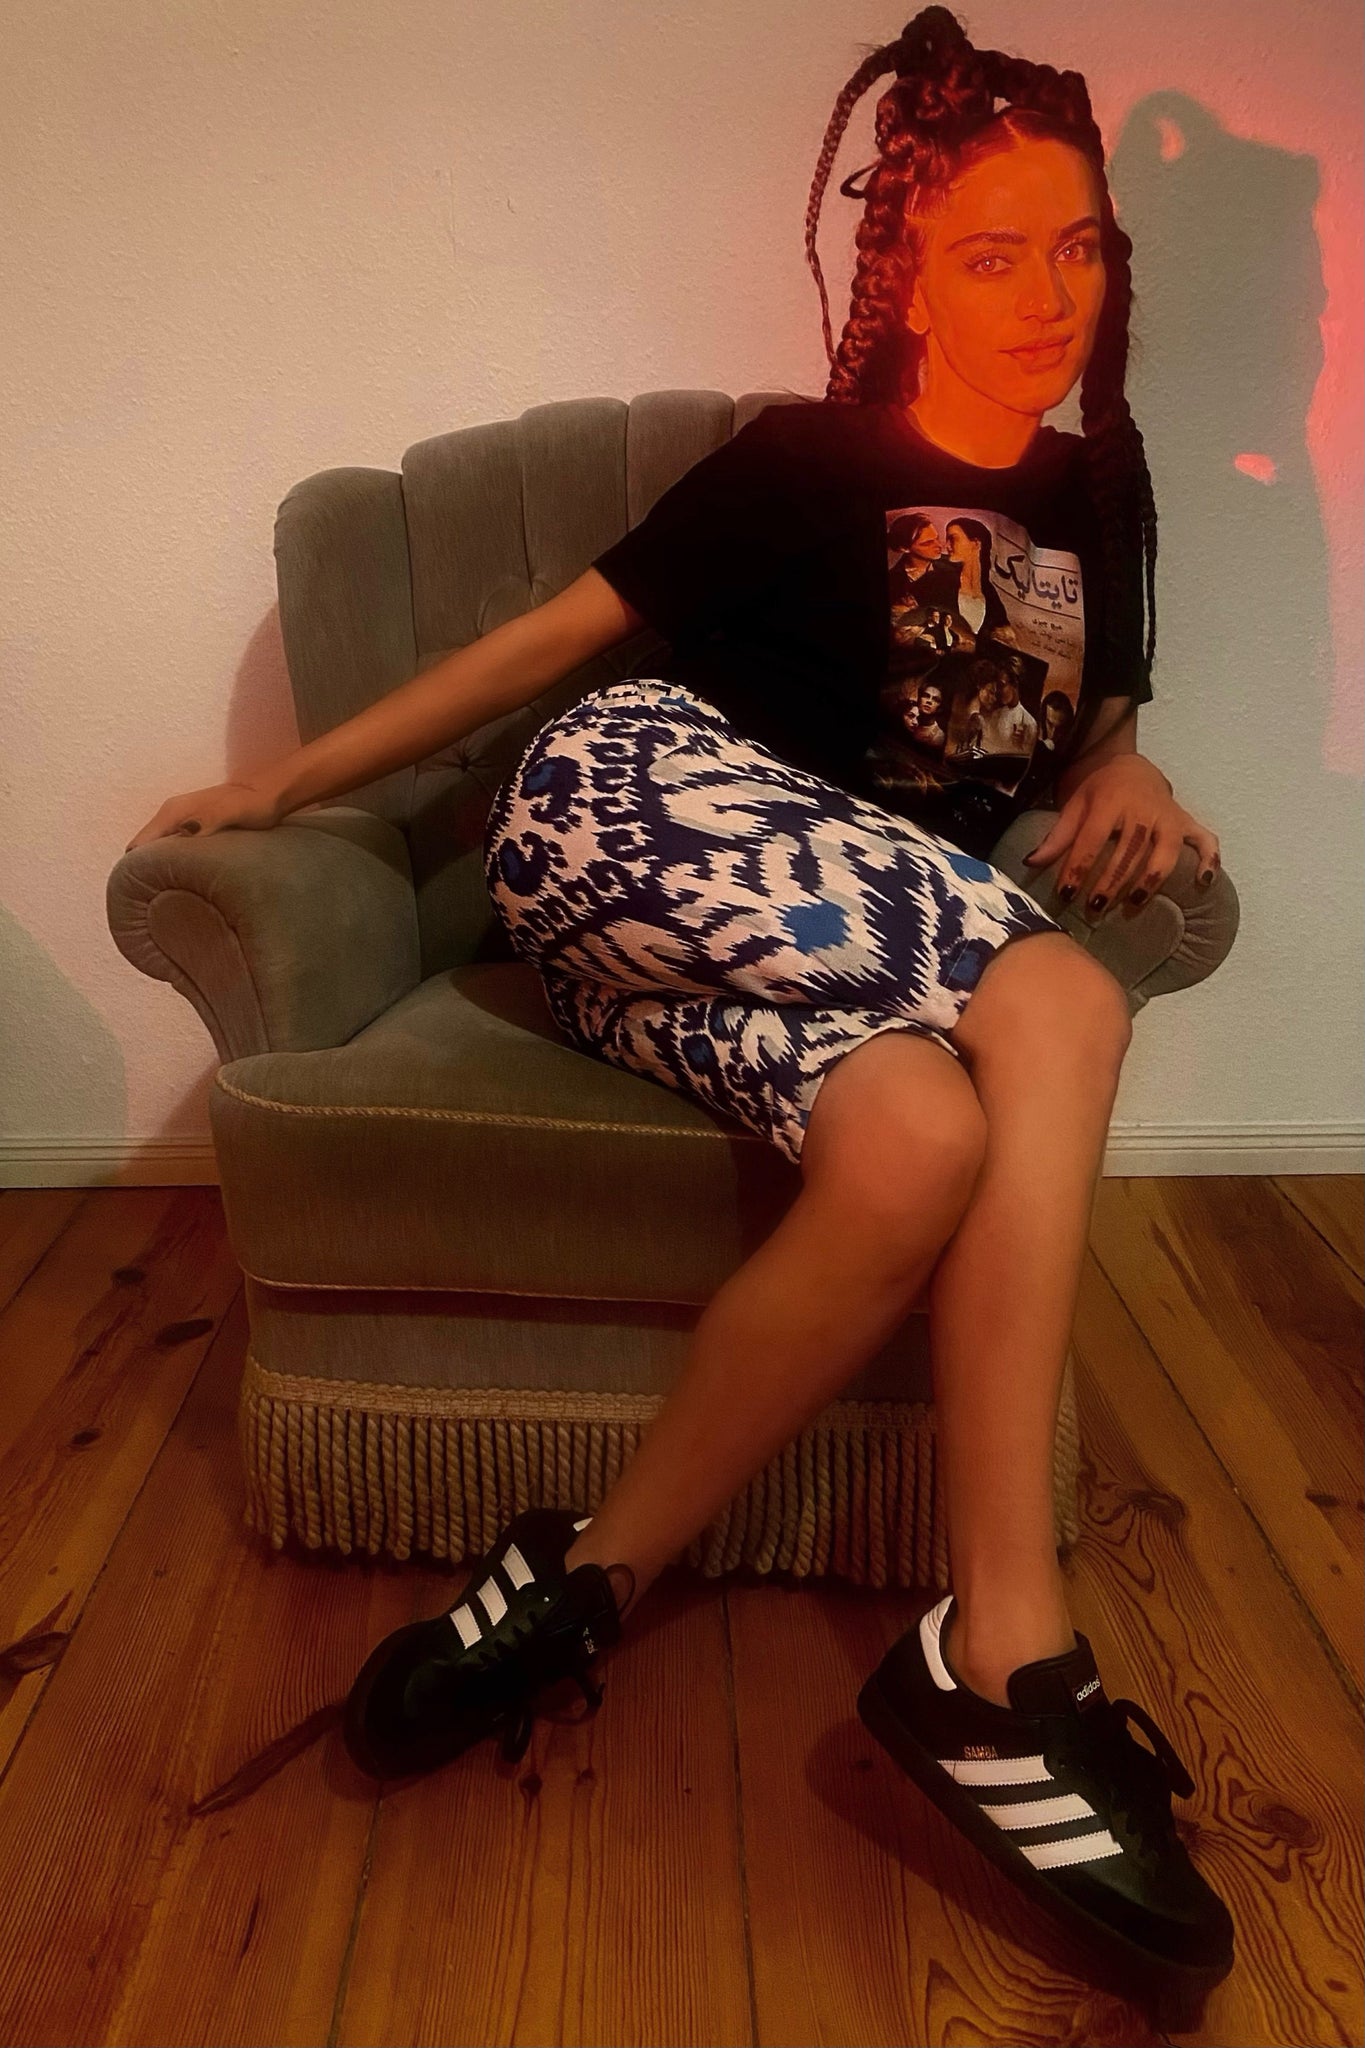 A red light shines on a woman on a grey chair, wearing Adidas Sambas, a Titanic graphic tee, and adras/ikat capris